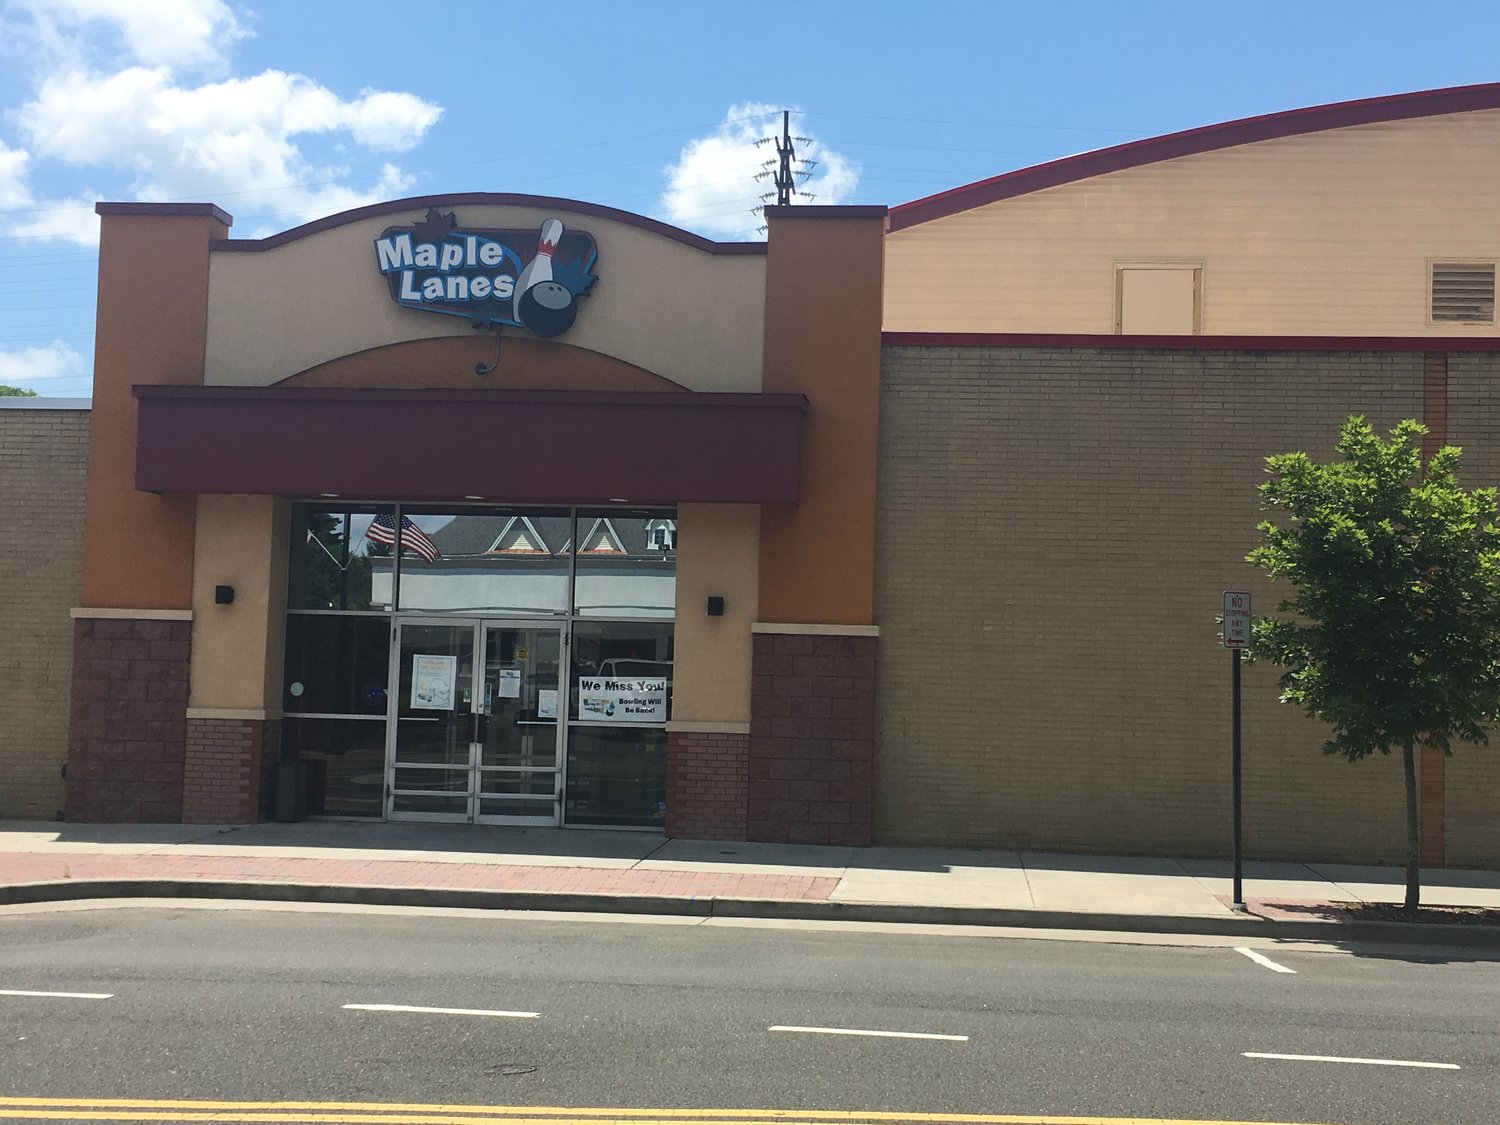 Maple Lanes in Rockville Centre was originally slated to reopen in Phase Four. As of July 10, there is still no timeline in place for when bowling centers can get back in business.